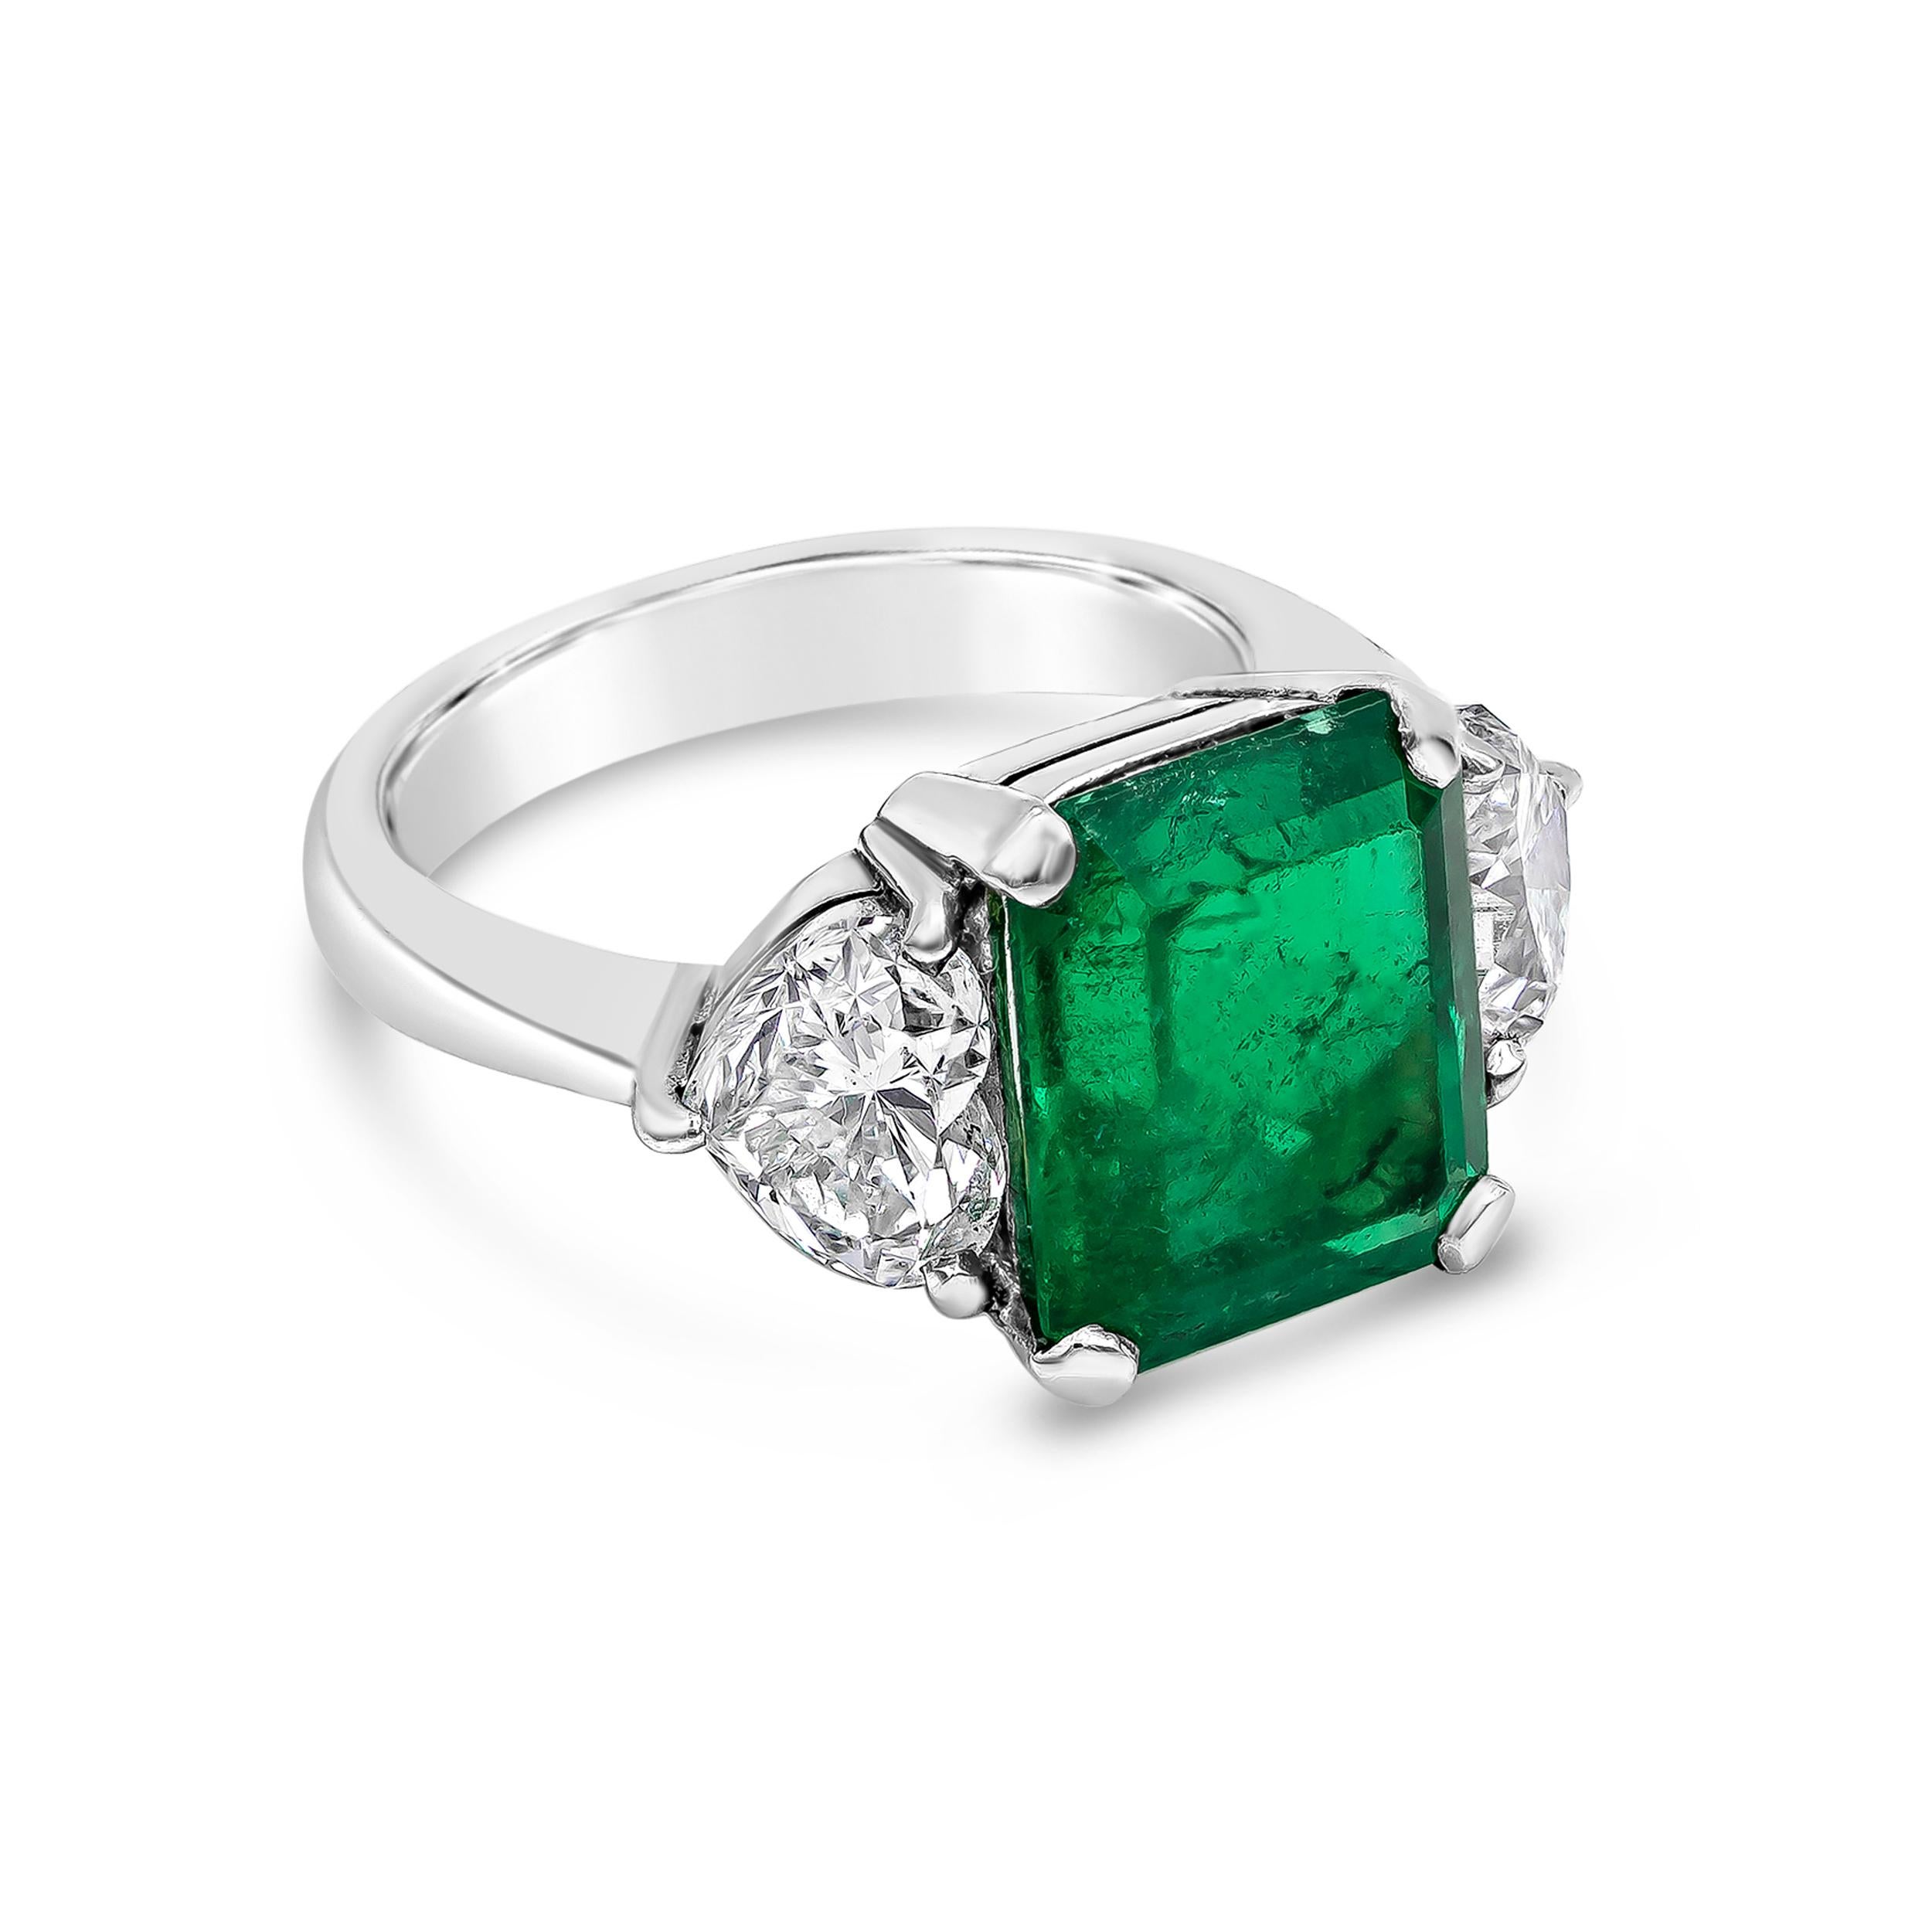 A chic engagement ring showcasing a 4.53 carat emerald cut green emerald, flanked by two heart shape diamonds weighing 2.01 carats total. Each diamond is certified by GIA as E-F color, SI1 clarity. Made in platinum.

Style available in different